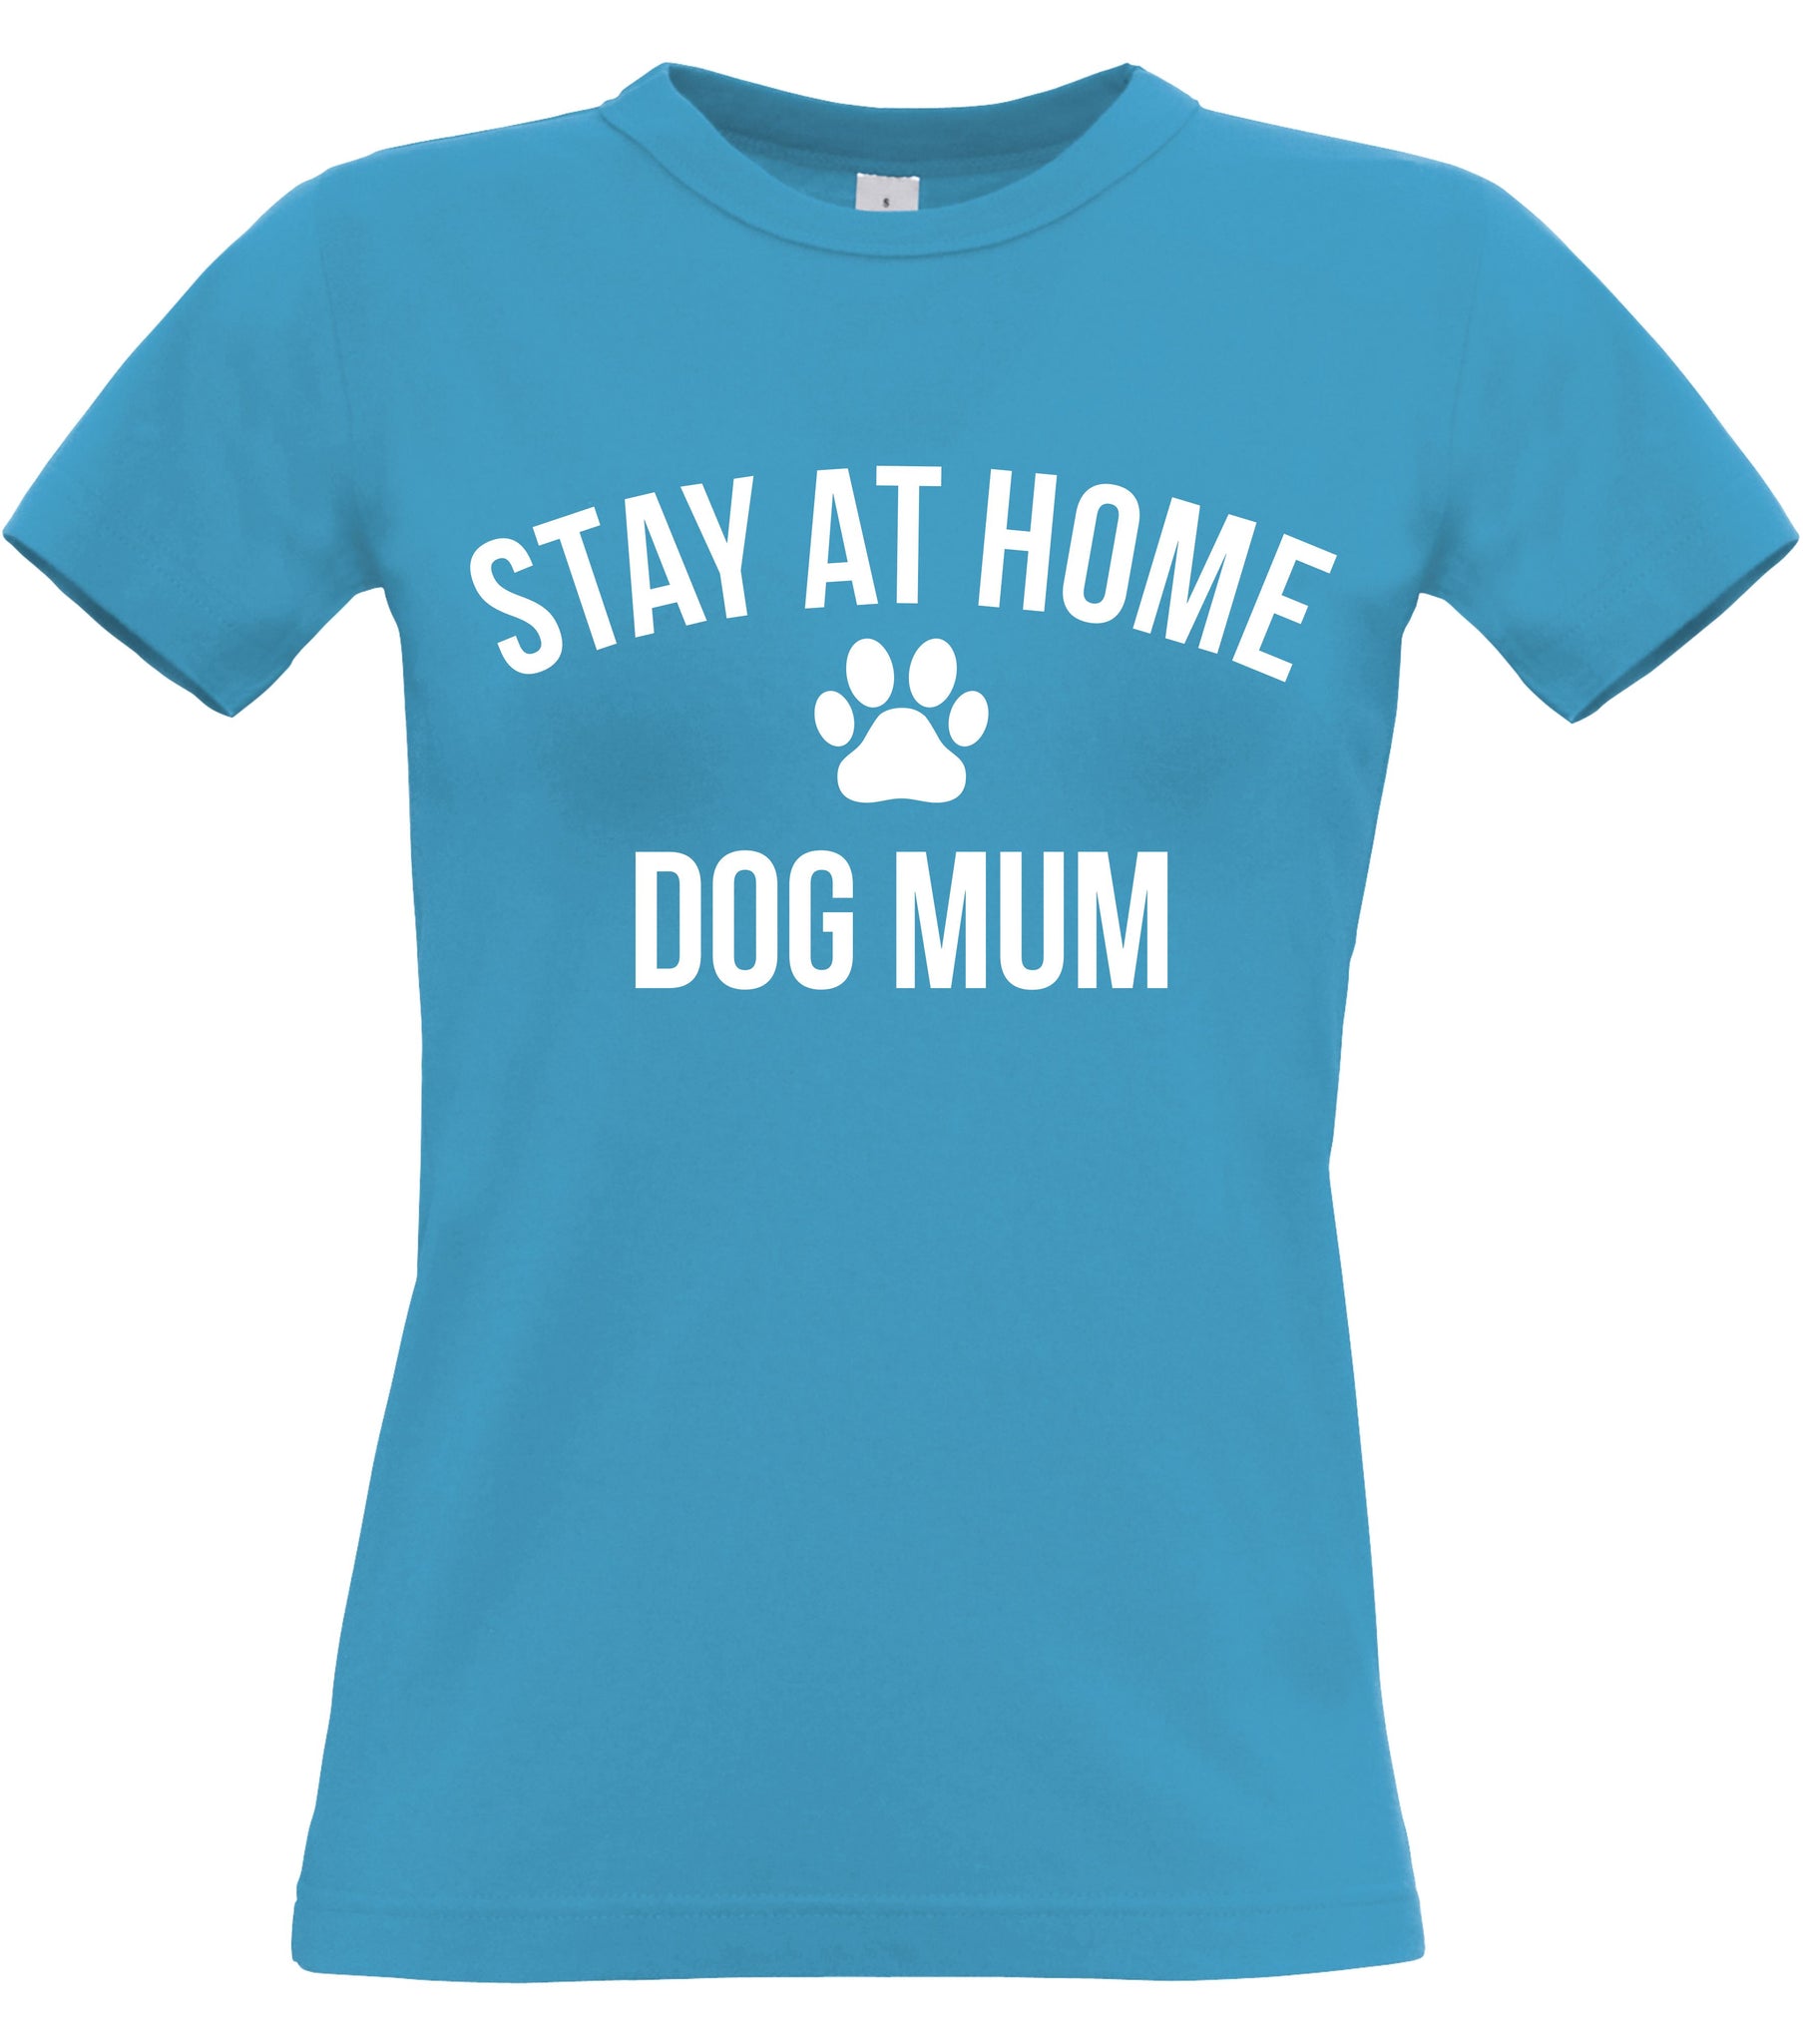 Women's Fitted T-Shirt 'Stay at Home Dog Mum'